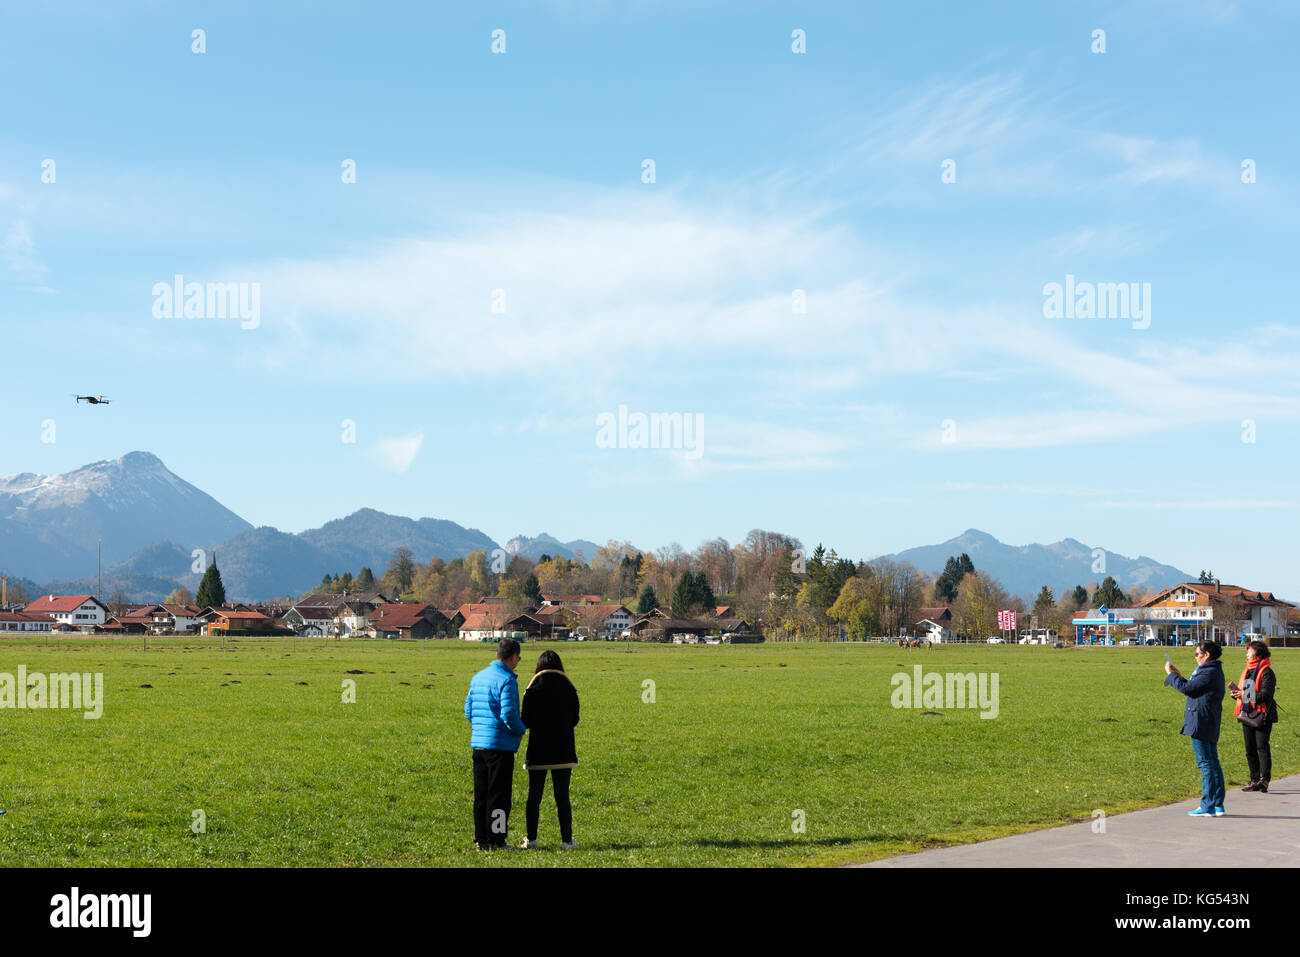 Asian people are playing with RC quadrocopter toy Stock Photo